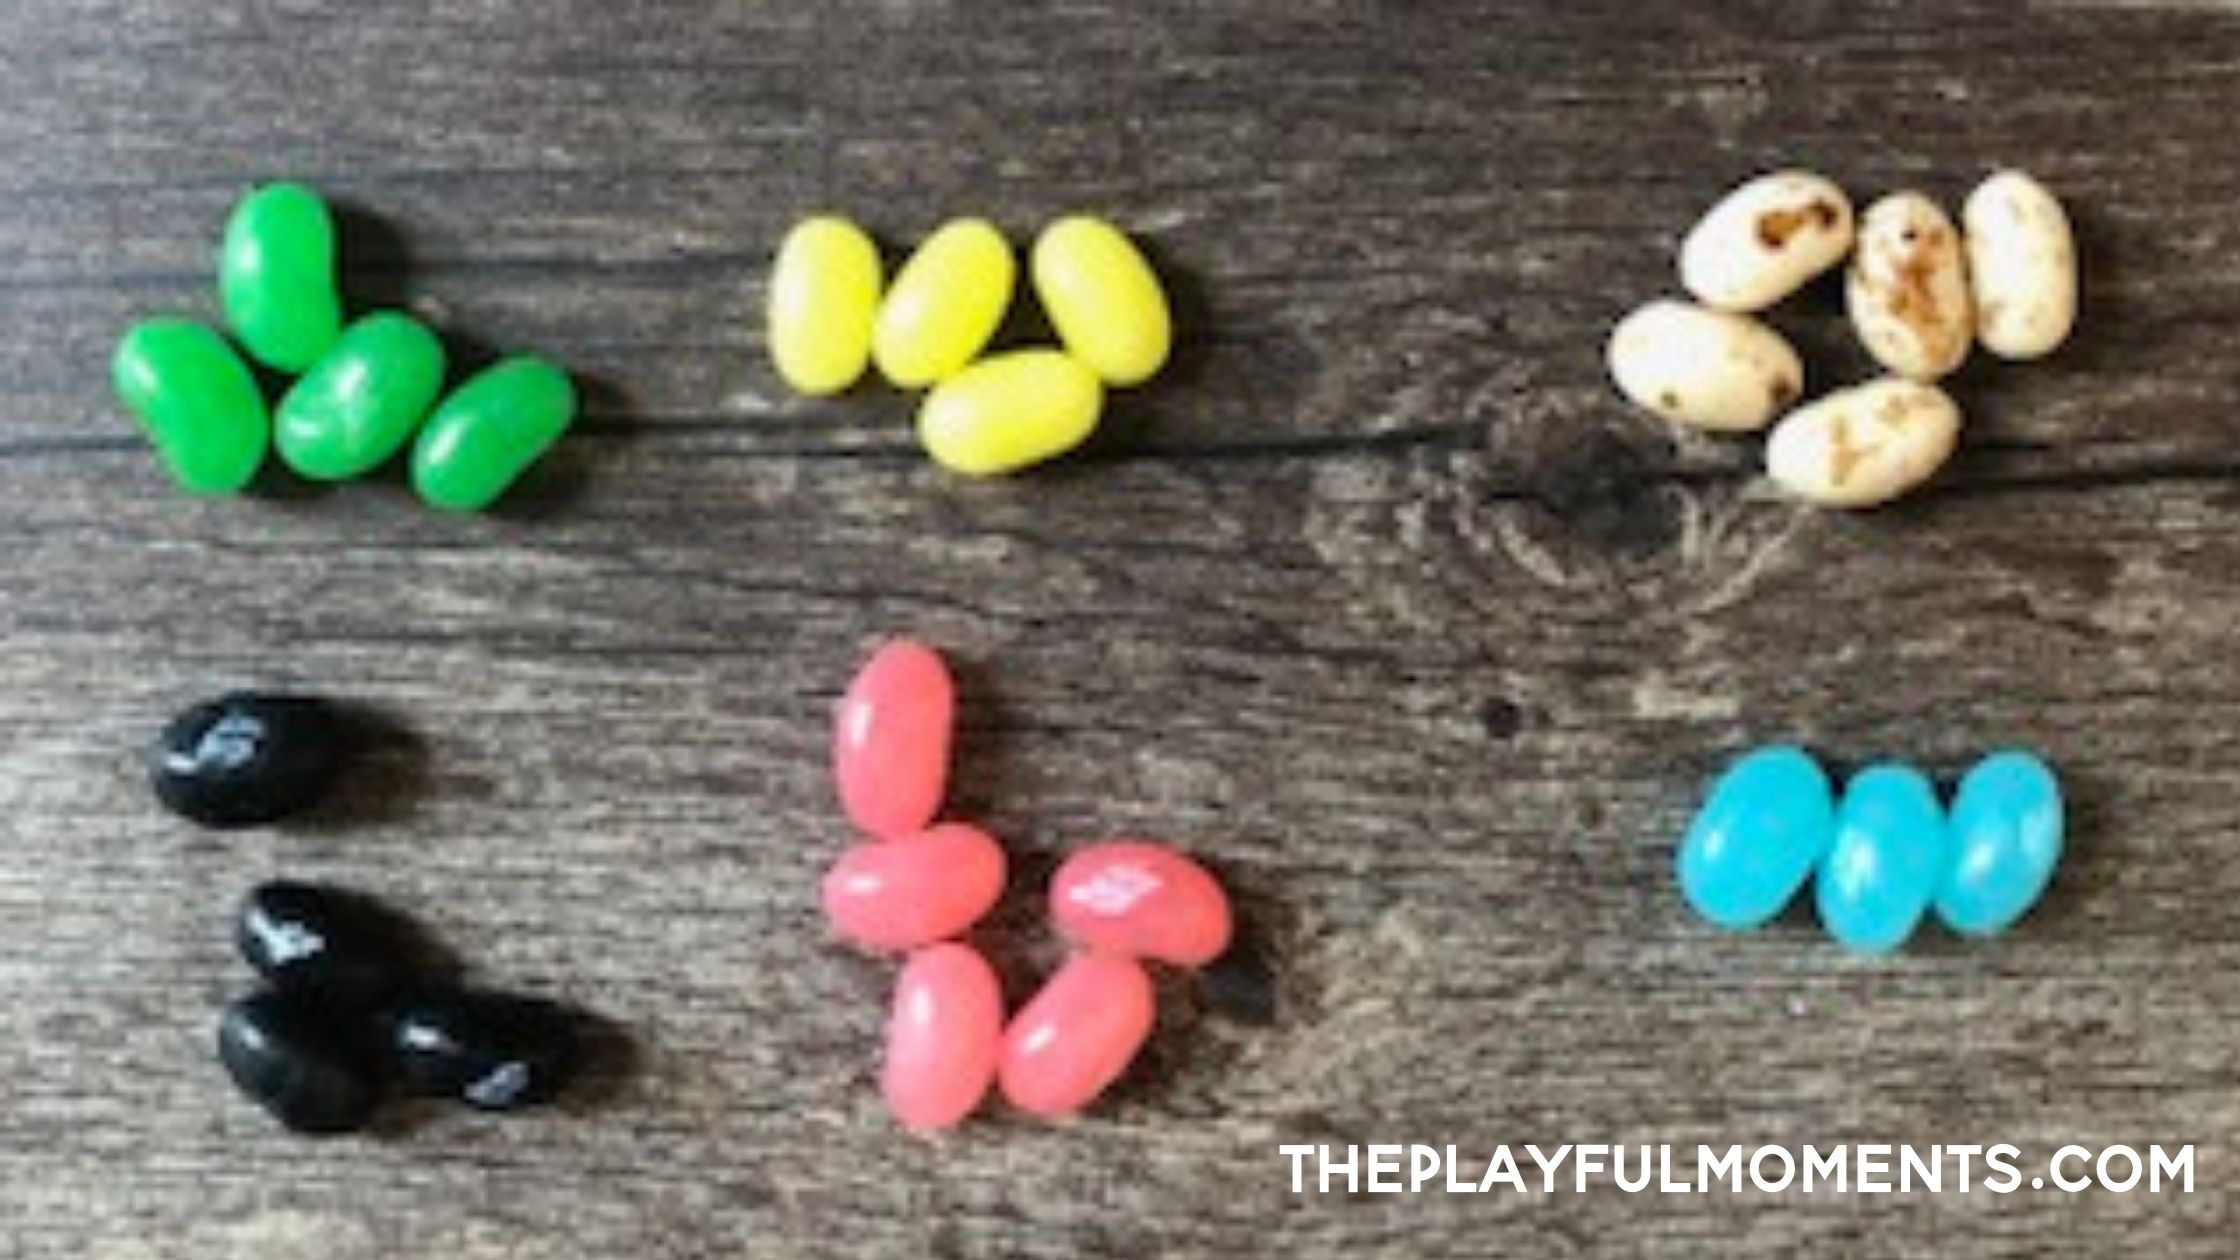 Groups of different colored jelly beans